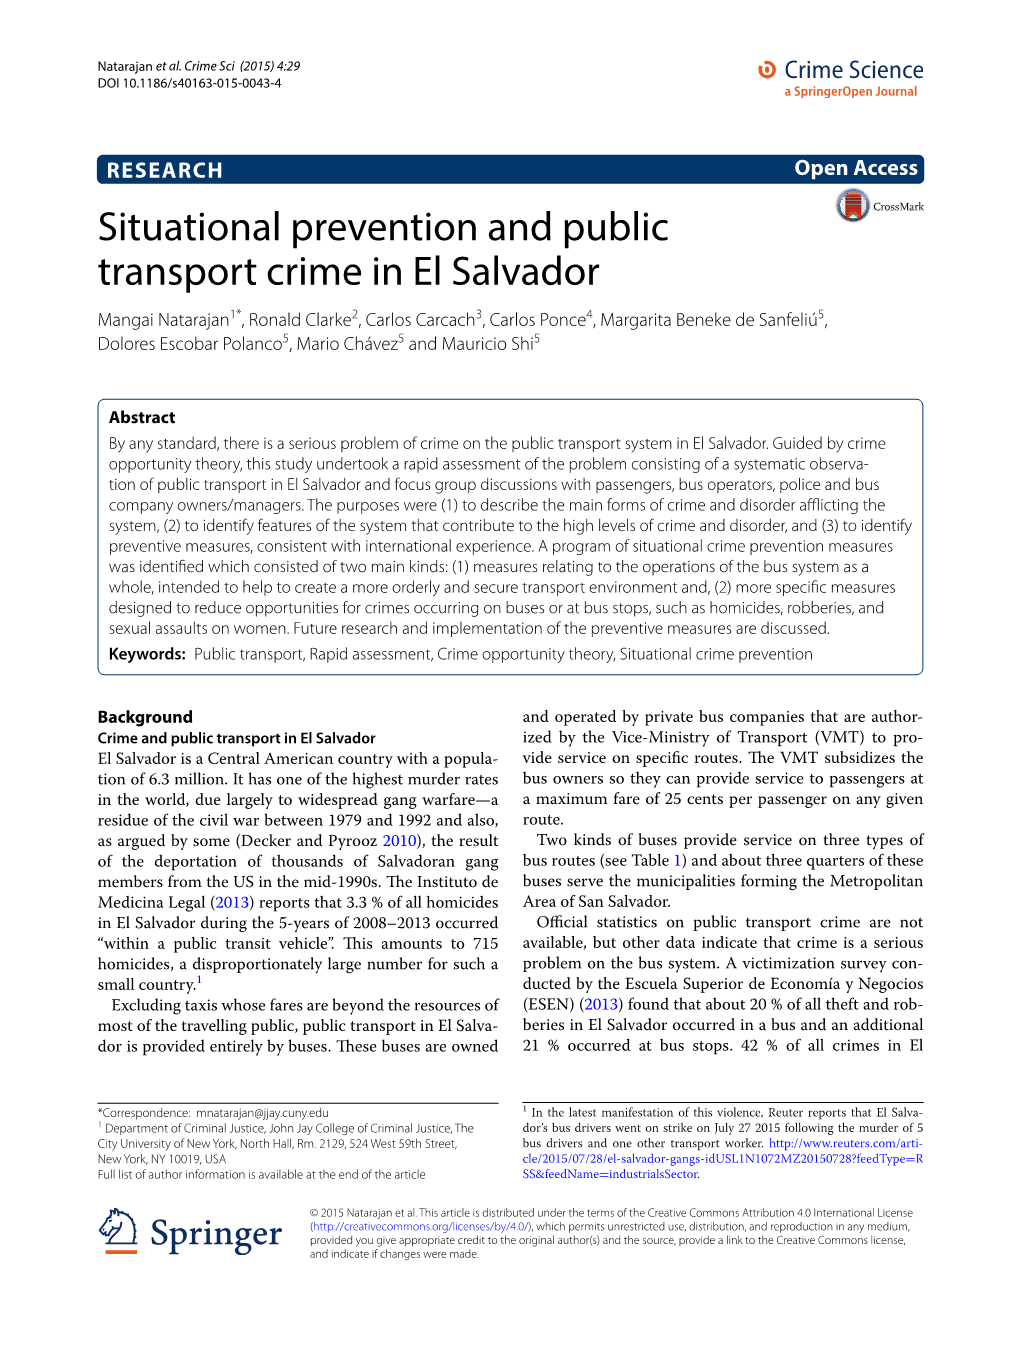 Situational Prevention and Public Transport Crime in El Salvador